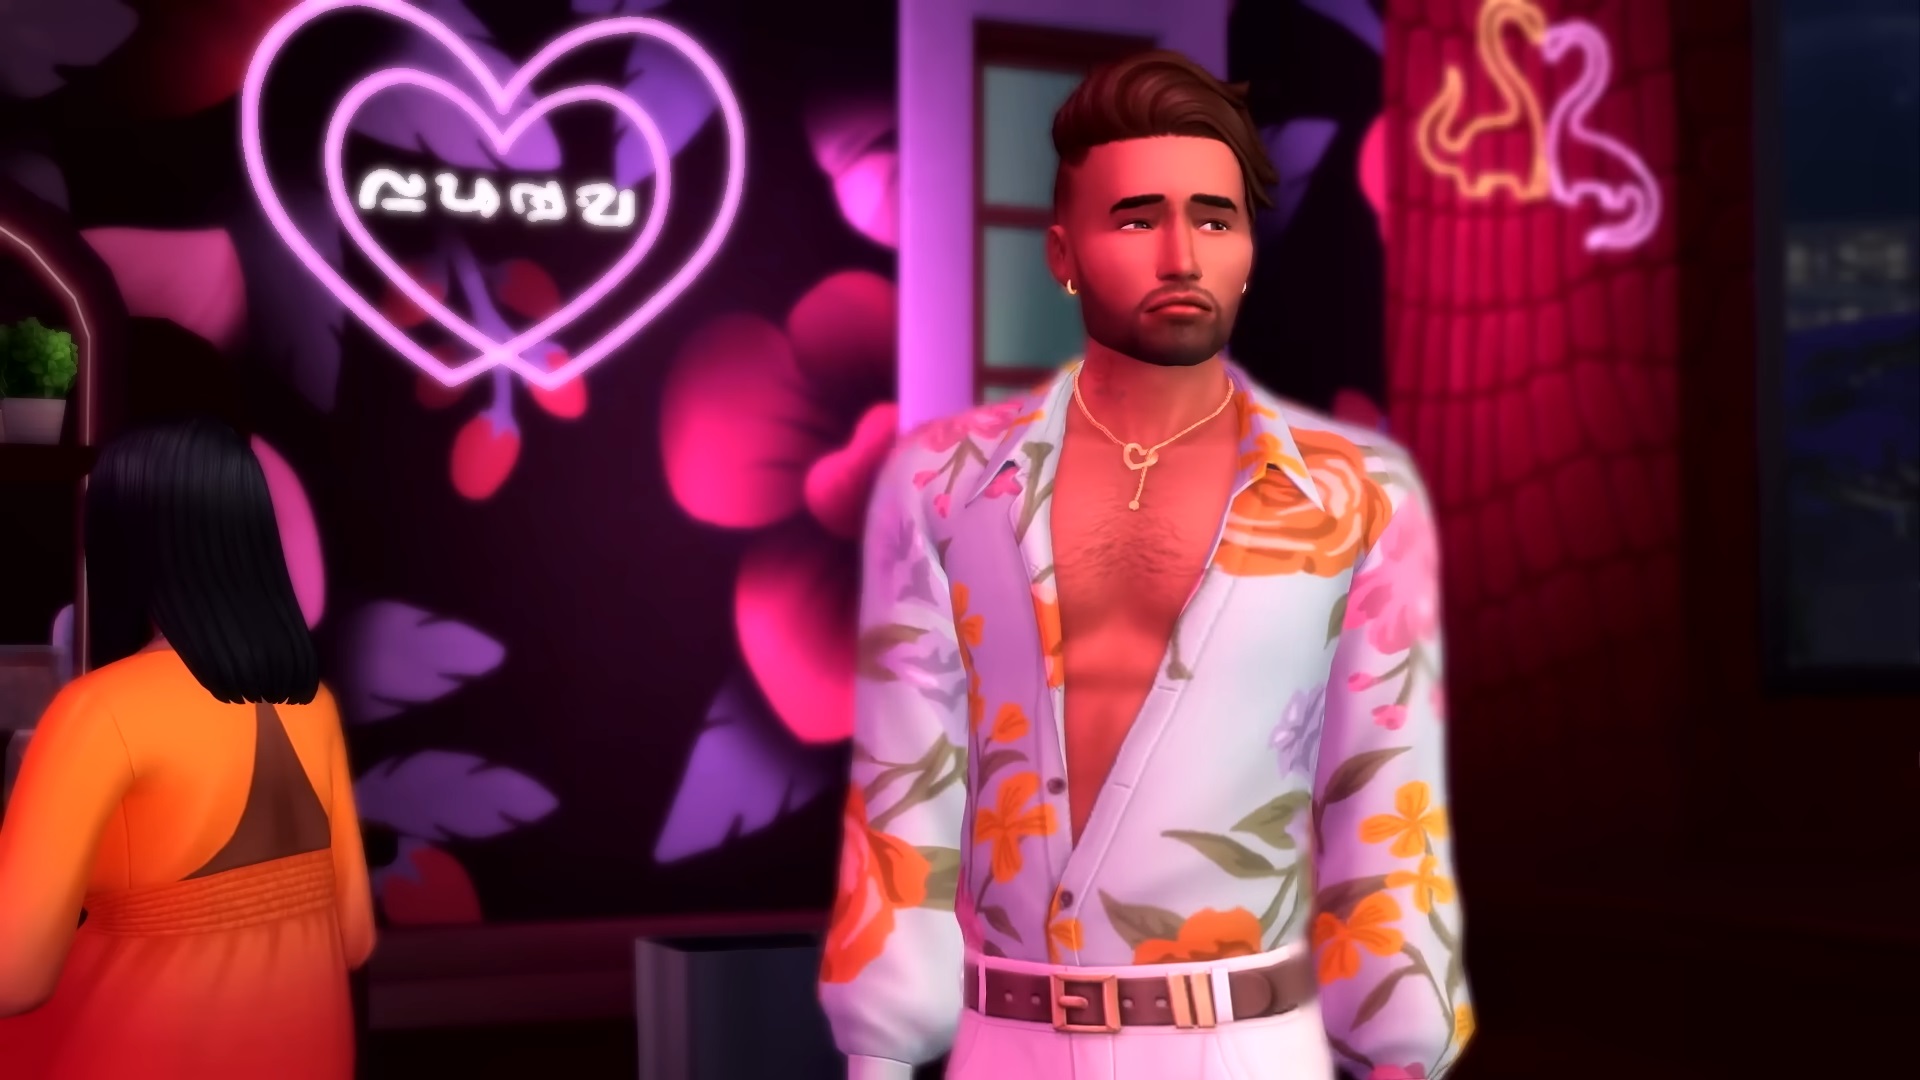 The Sims 4 Lovestruck - a Sim wearing a floral shirt looks disappointed in a neon lit club